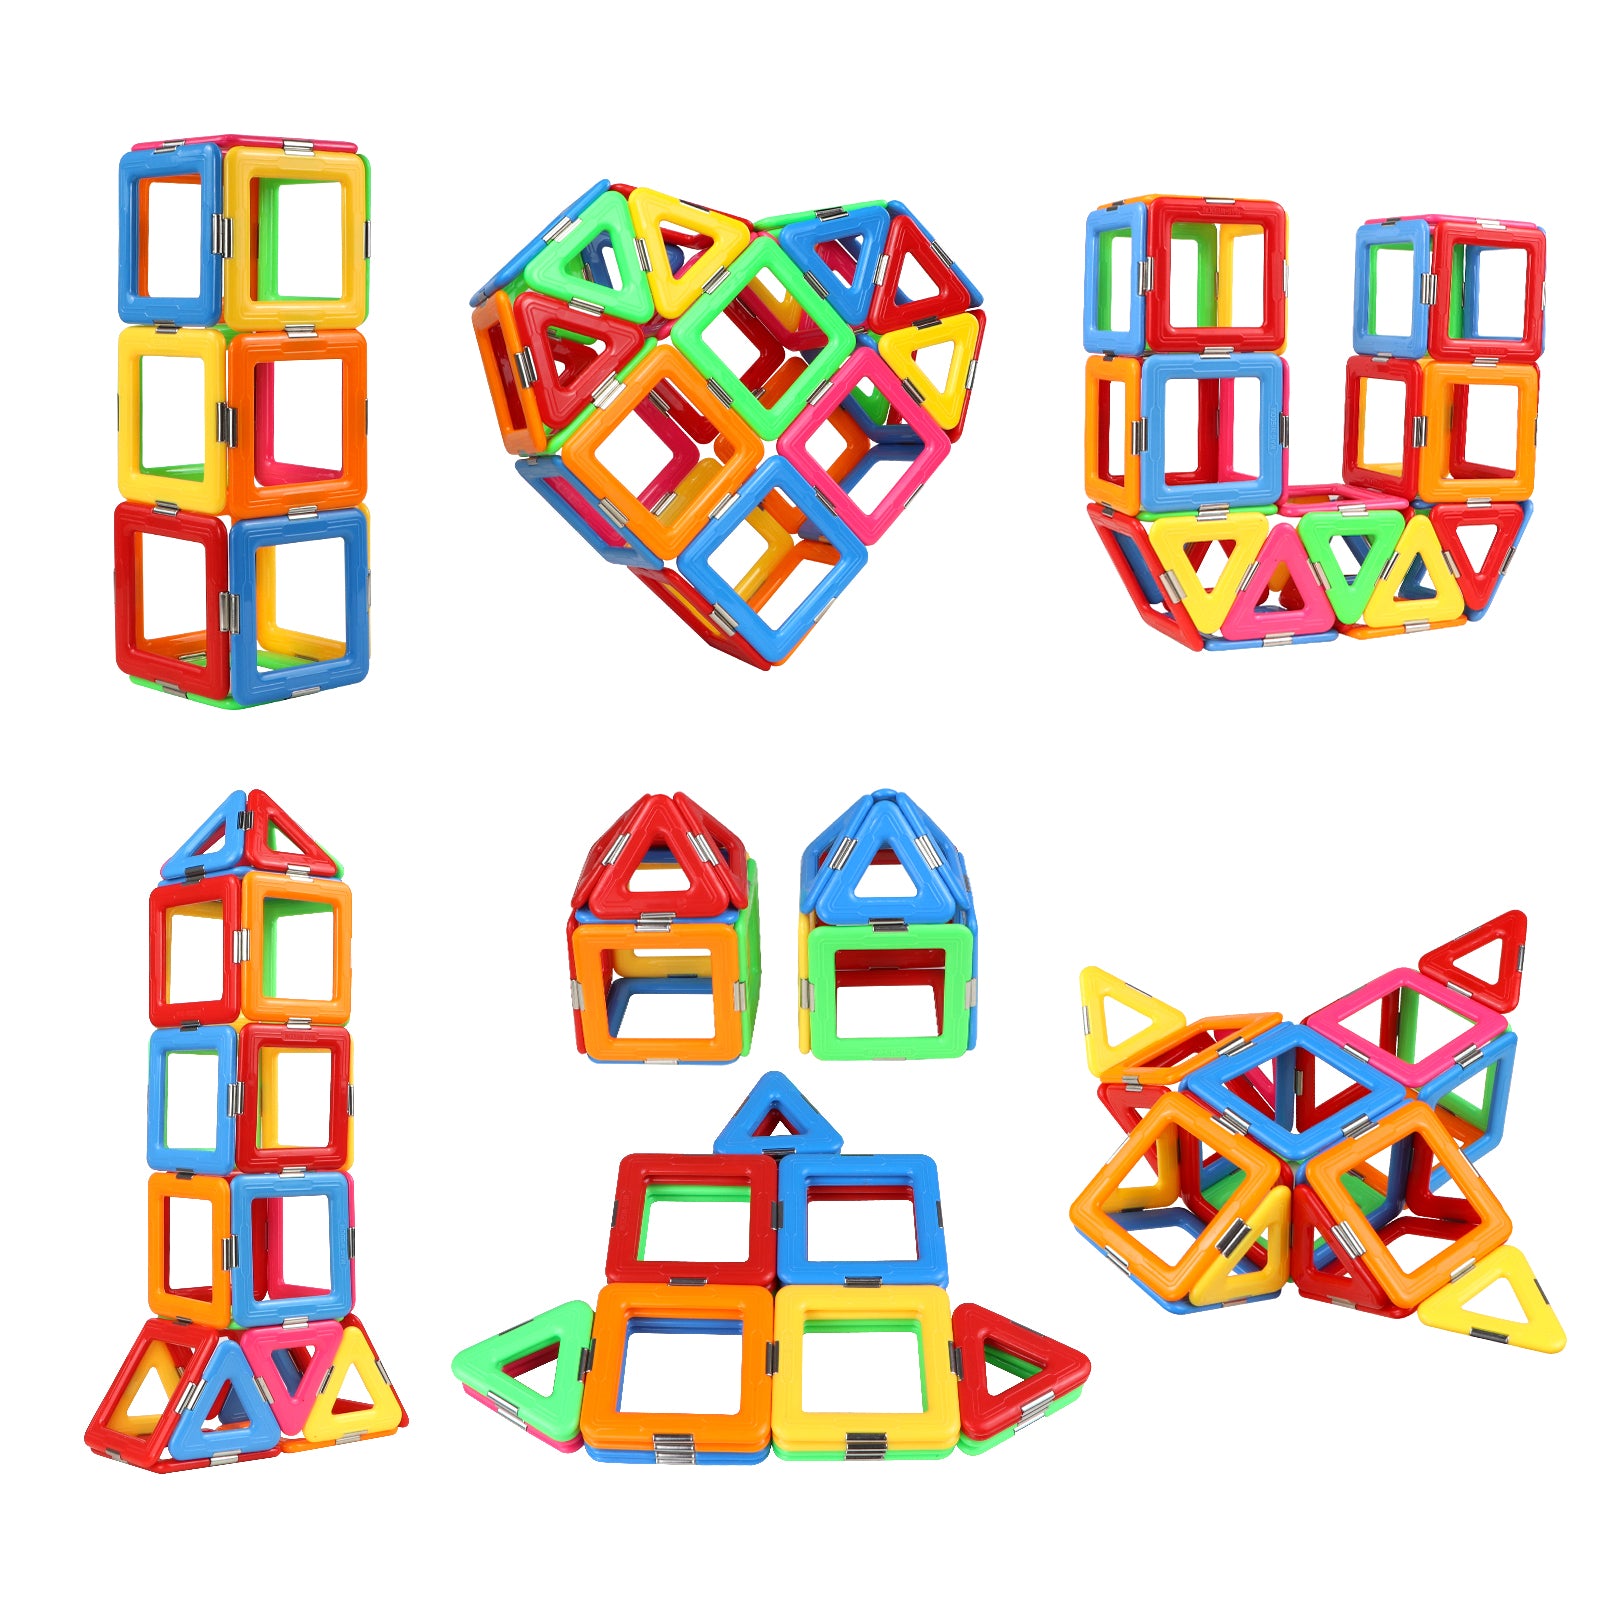 Magnetic Tiles with Cars 78PCS, Kids Gifts & Toys for 3 Year Old Boys, –  Soyeeglobal